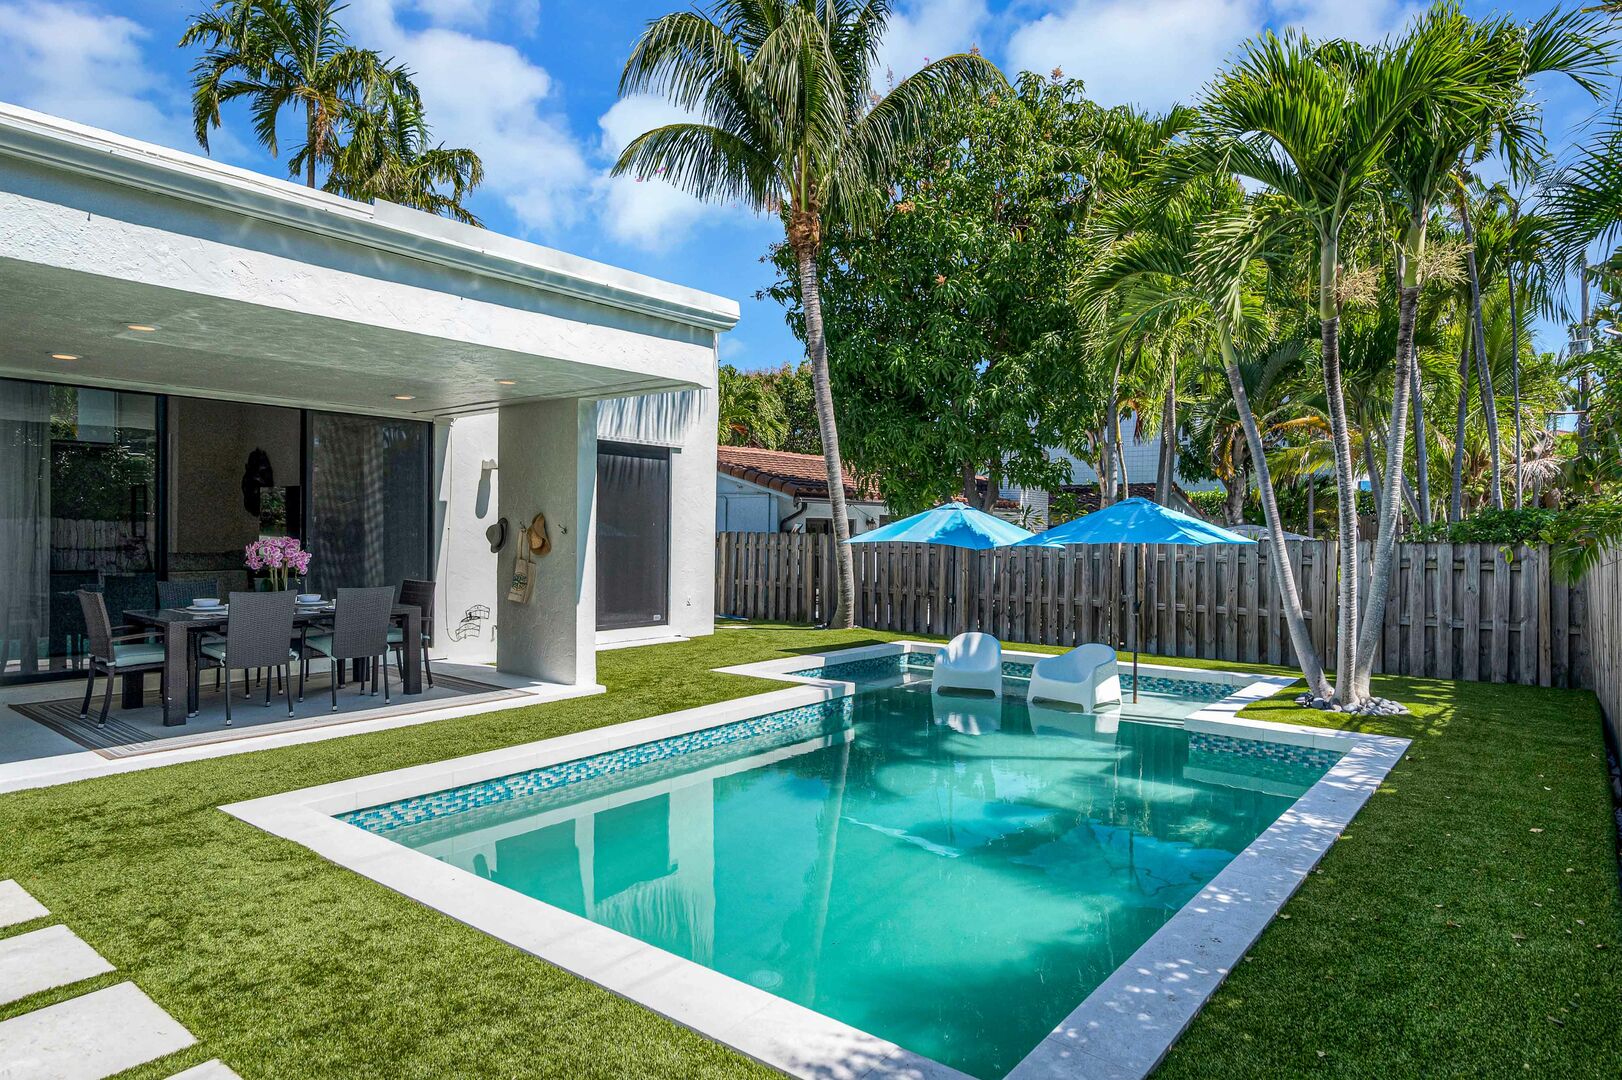 The private garden features a heated pool with loungers, tanning shelf and al fresco dining.